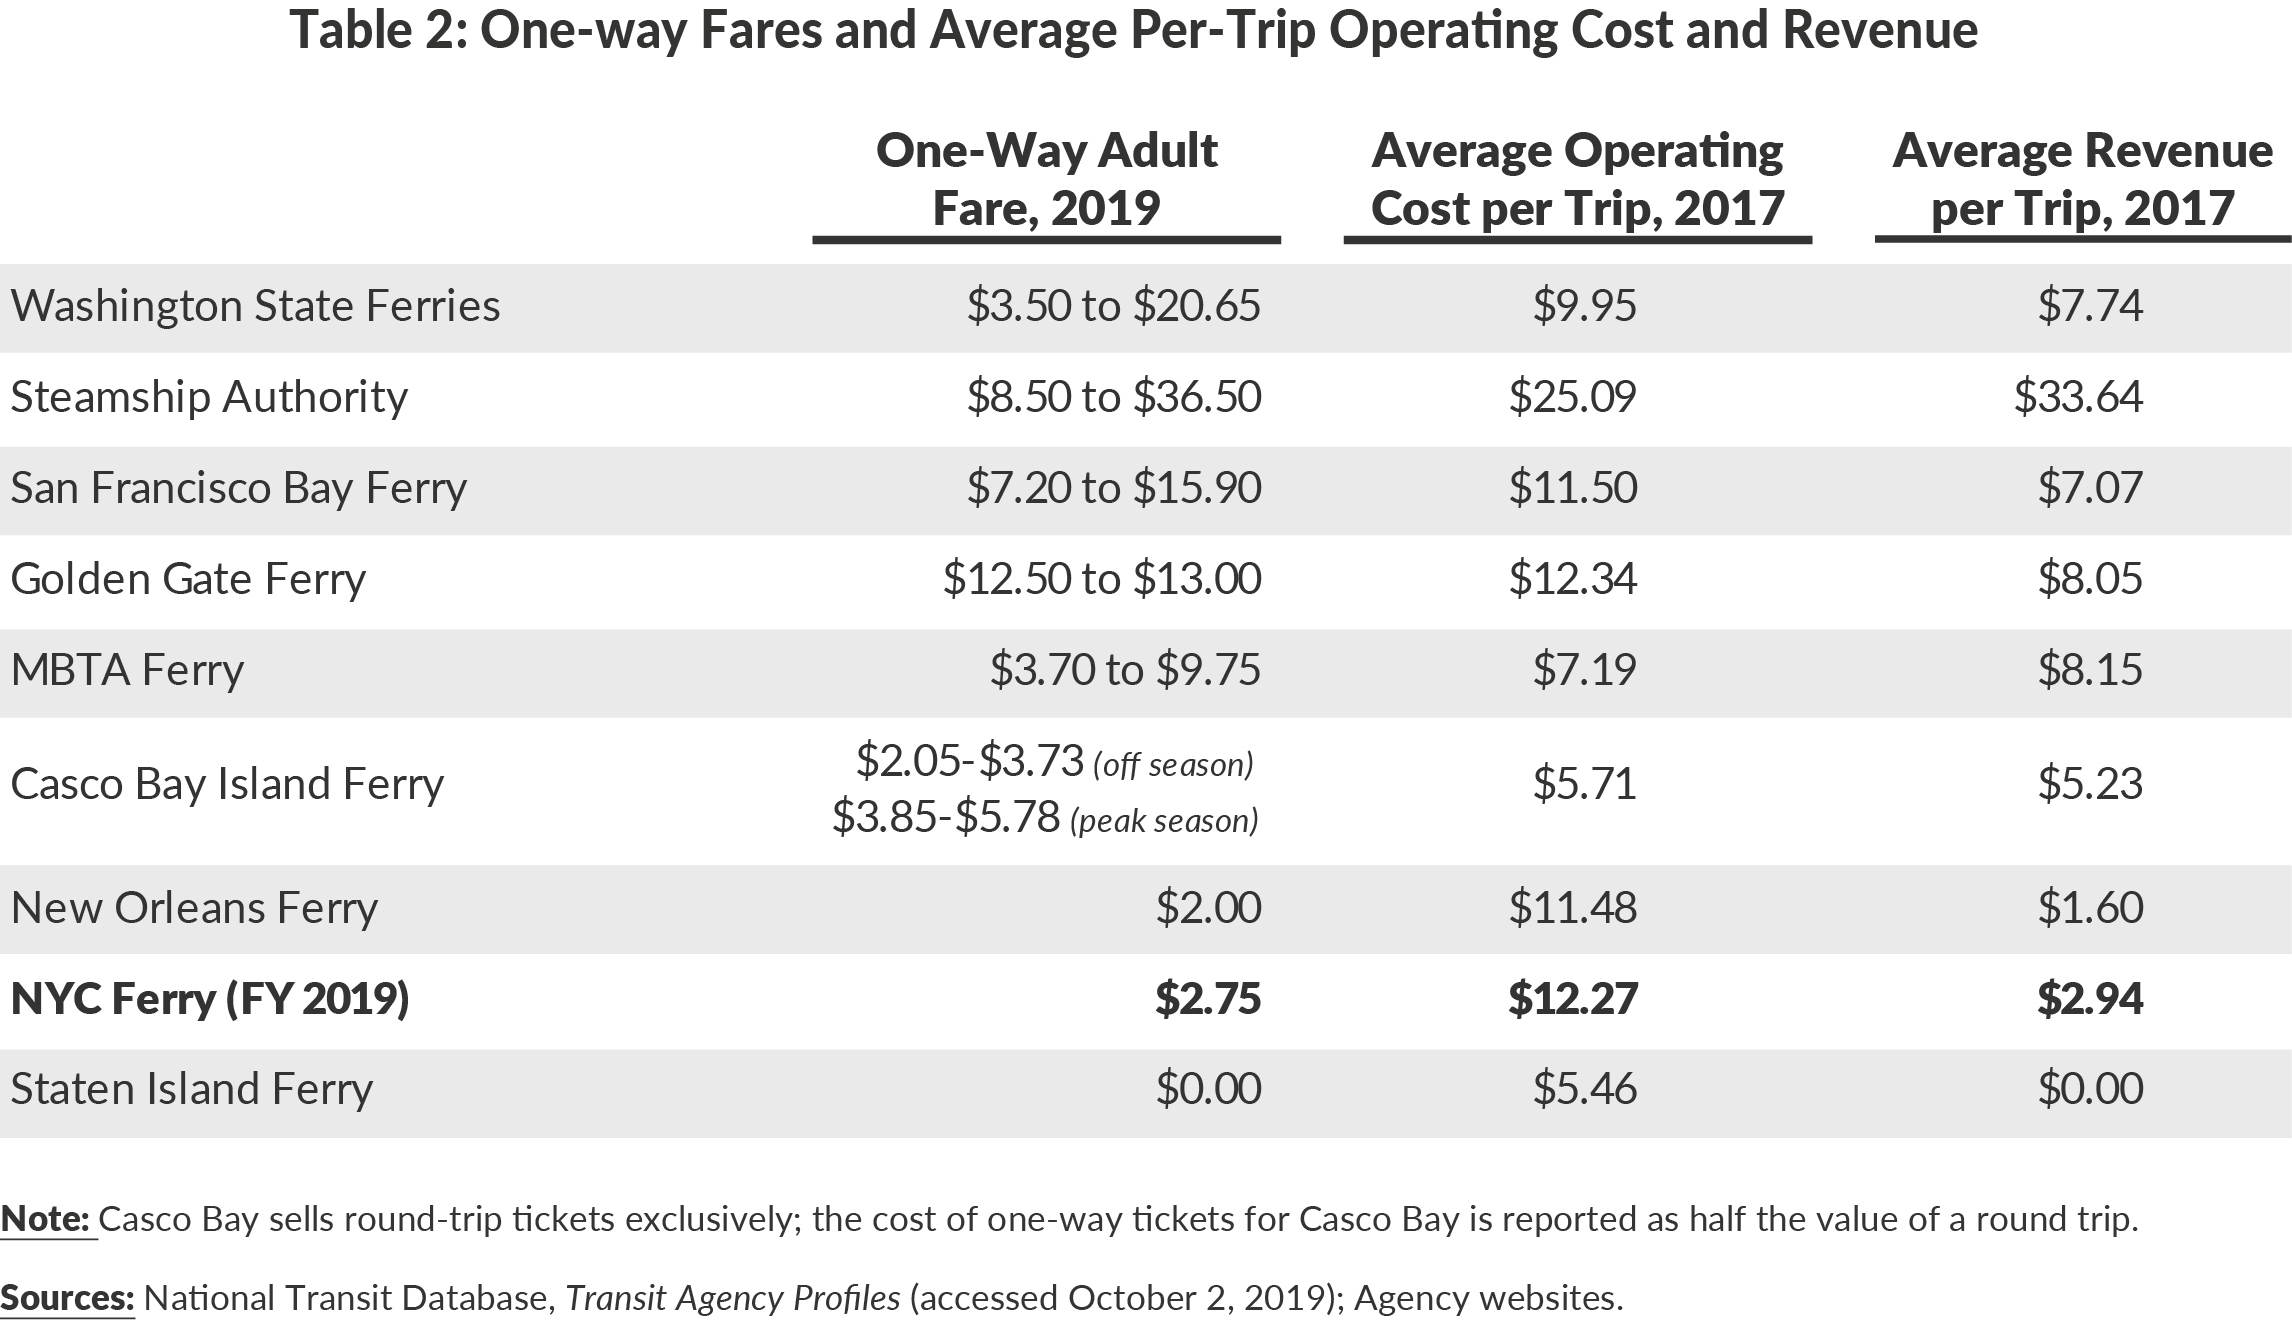 Table 2. One-way Fares and Average Per-Trip Operating Cost and Revenue